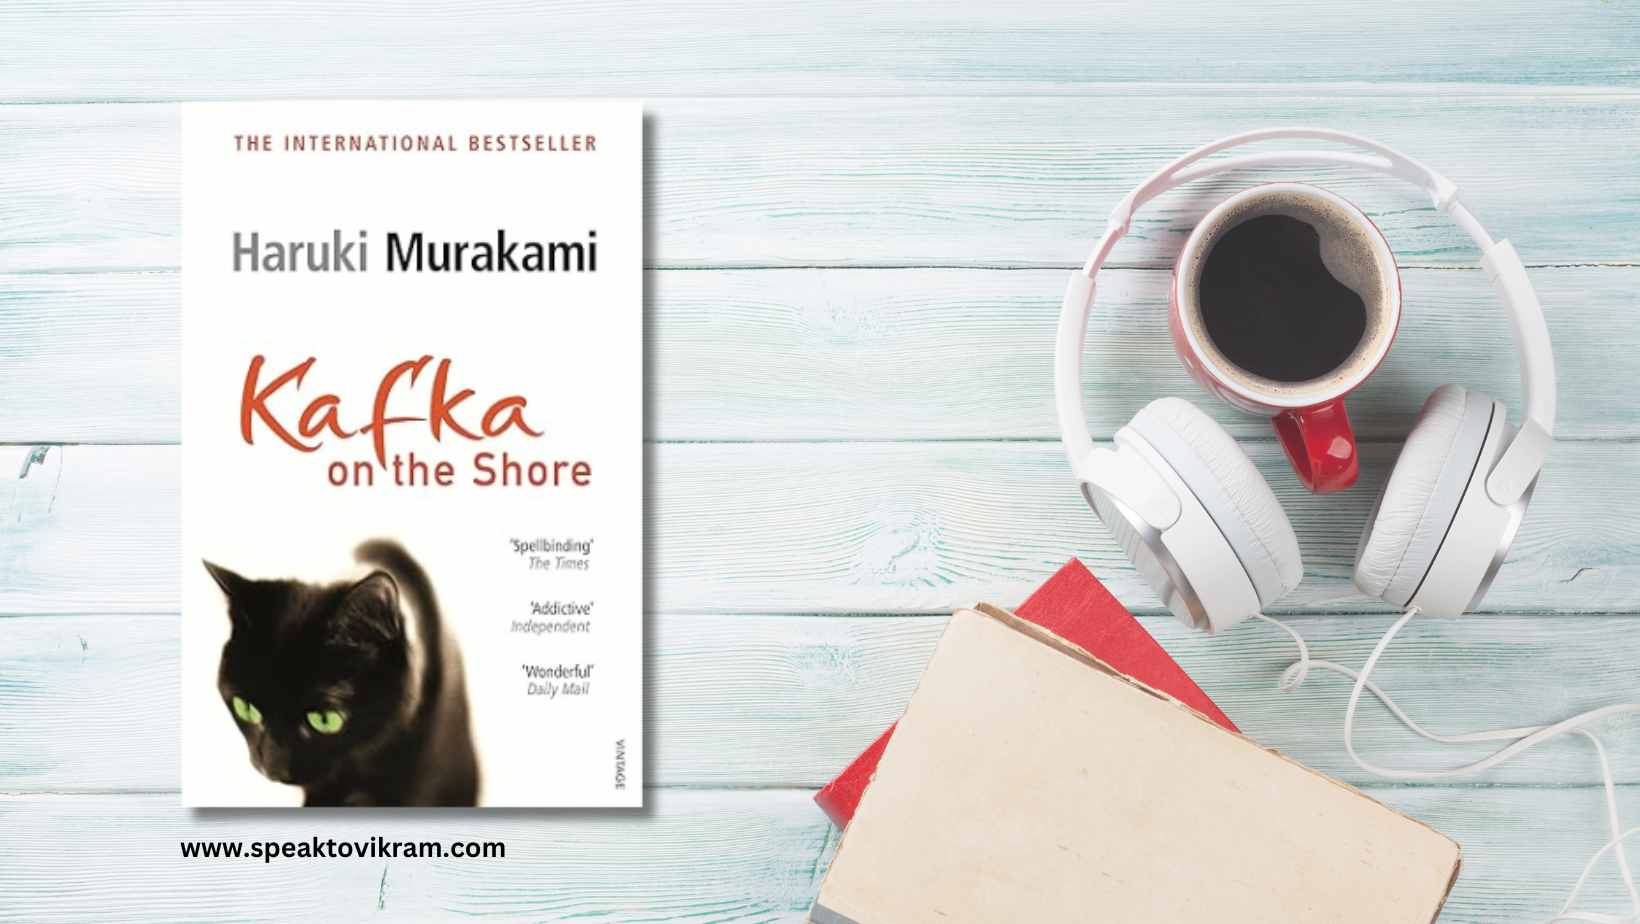 You are currently viewing “Kafka on The Shore” by Haruki Murakami is a literary masterpiece that weaves together the surreal and the mundane in a mesmerizing tapestry